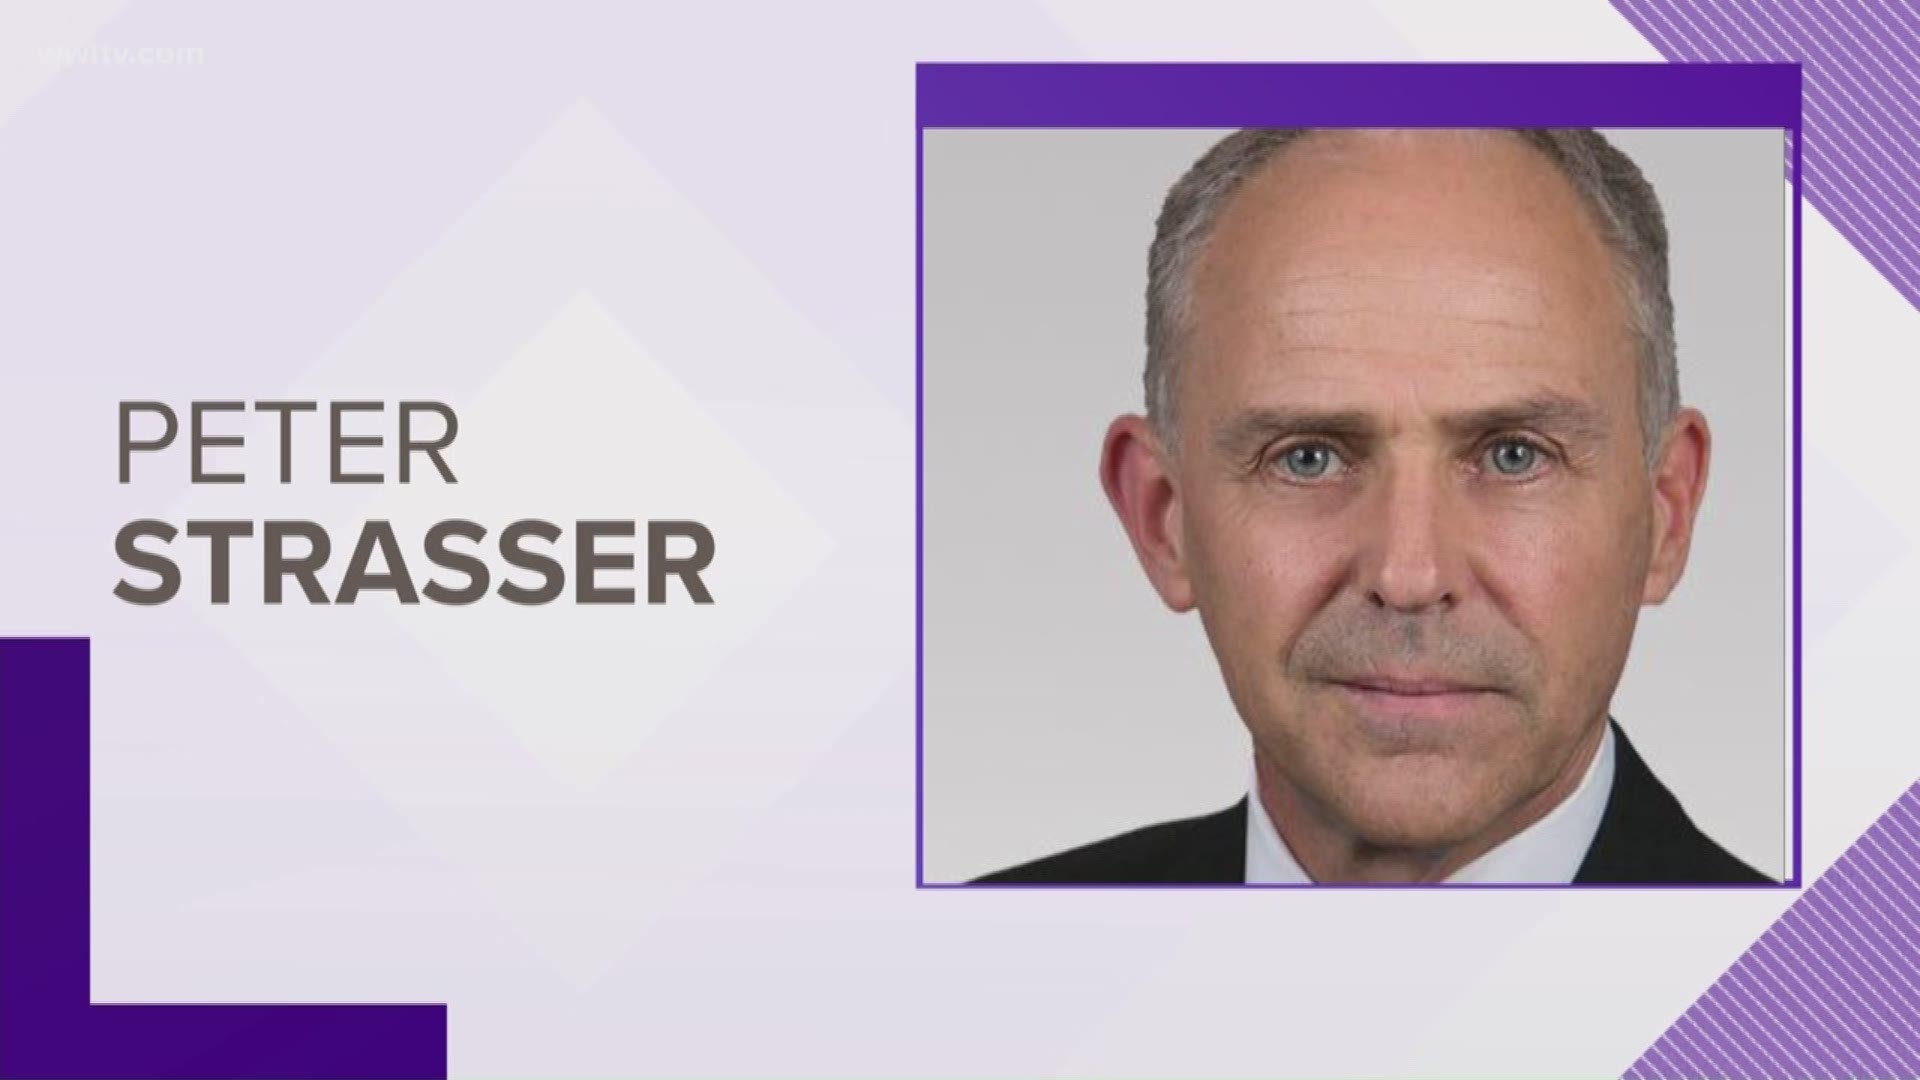 Strasser is a partner in a local law firm and former federal prosecutor. His nomination will need to be confirmed by the Senate Judiciary Committee & full Senate.